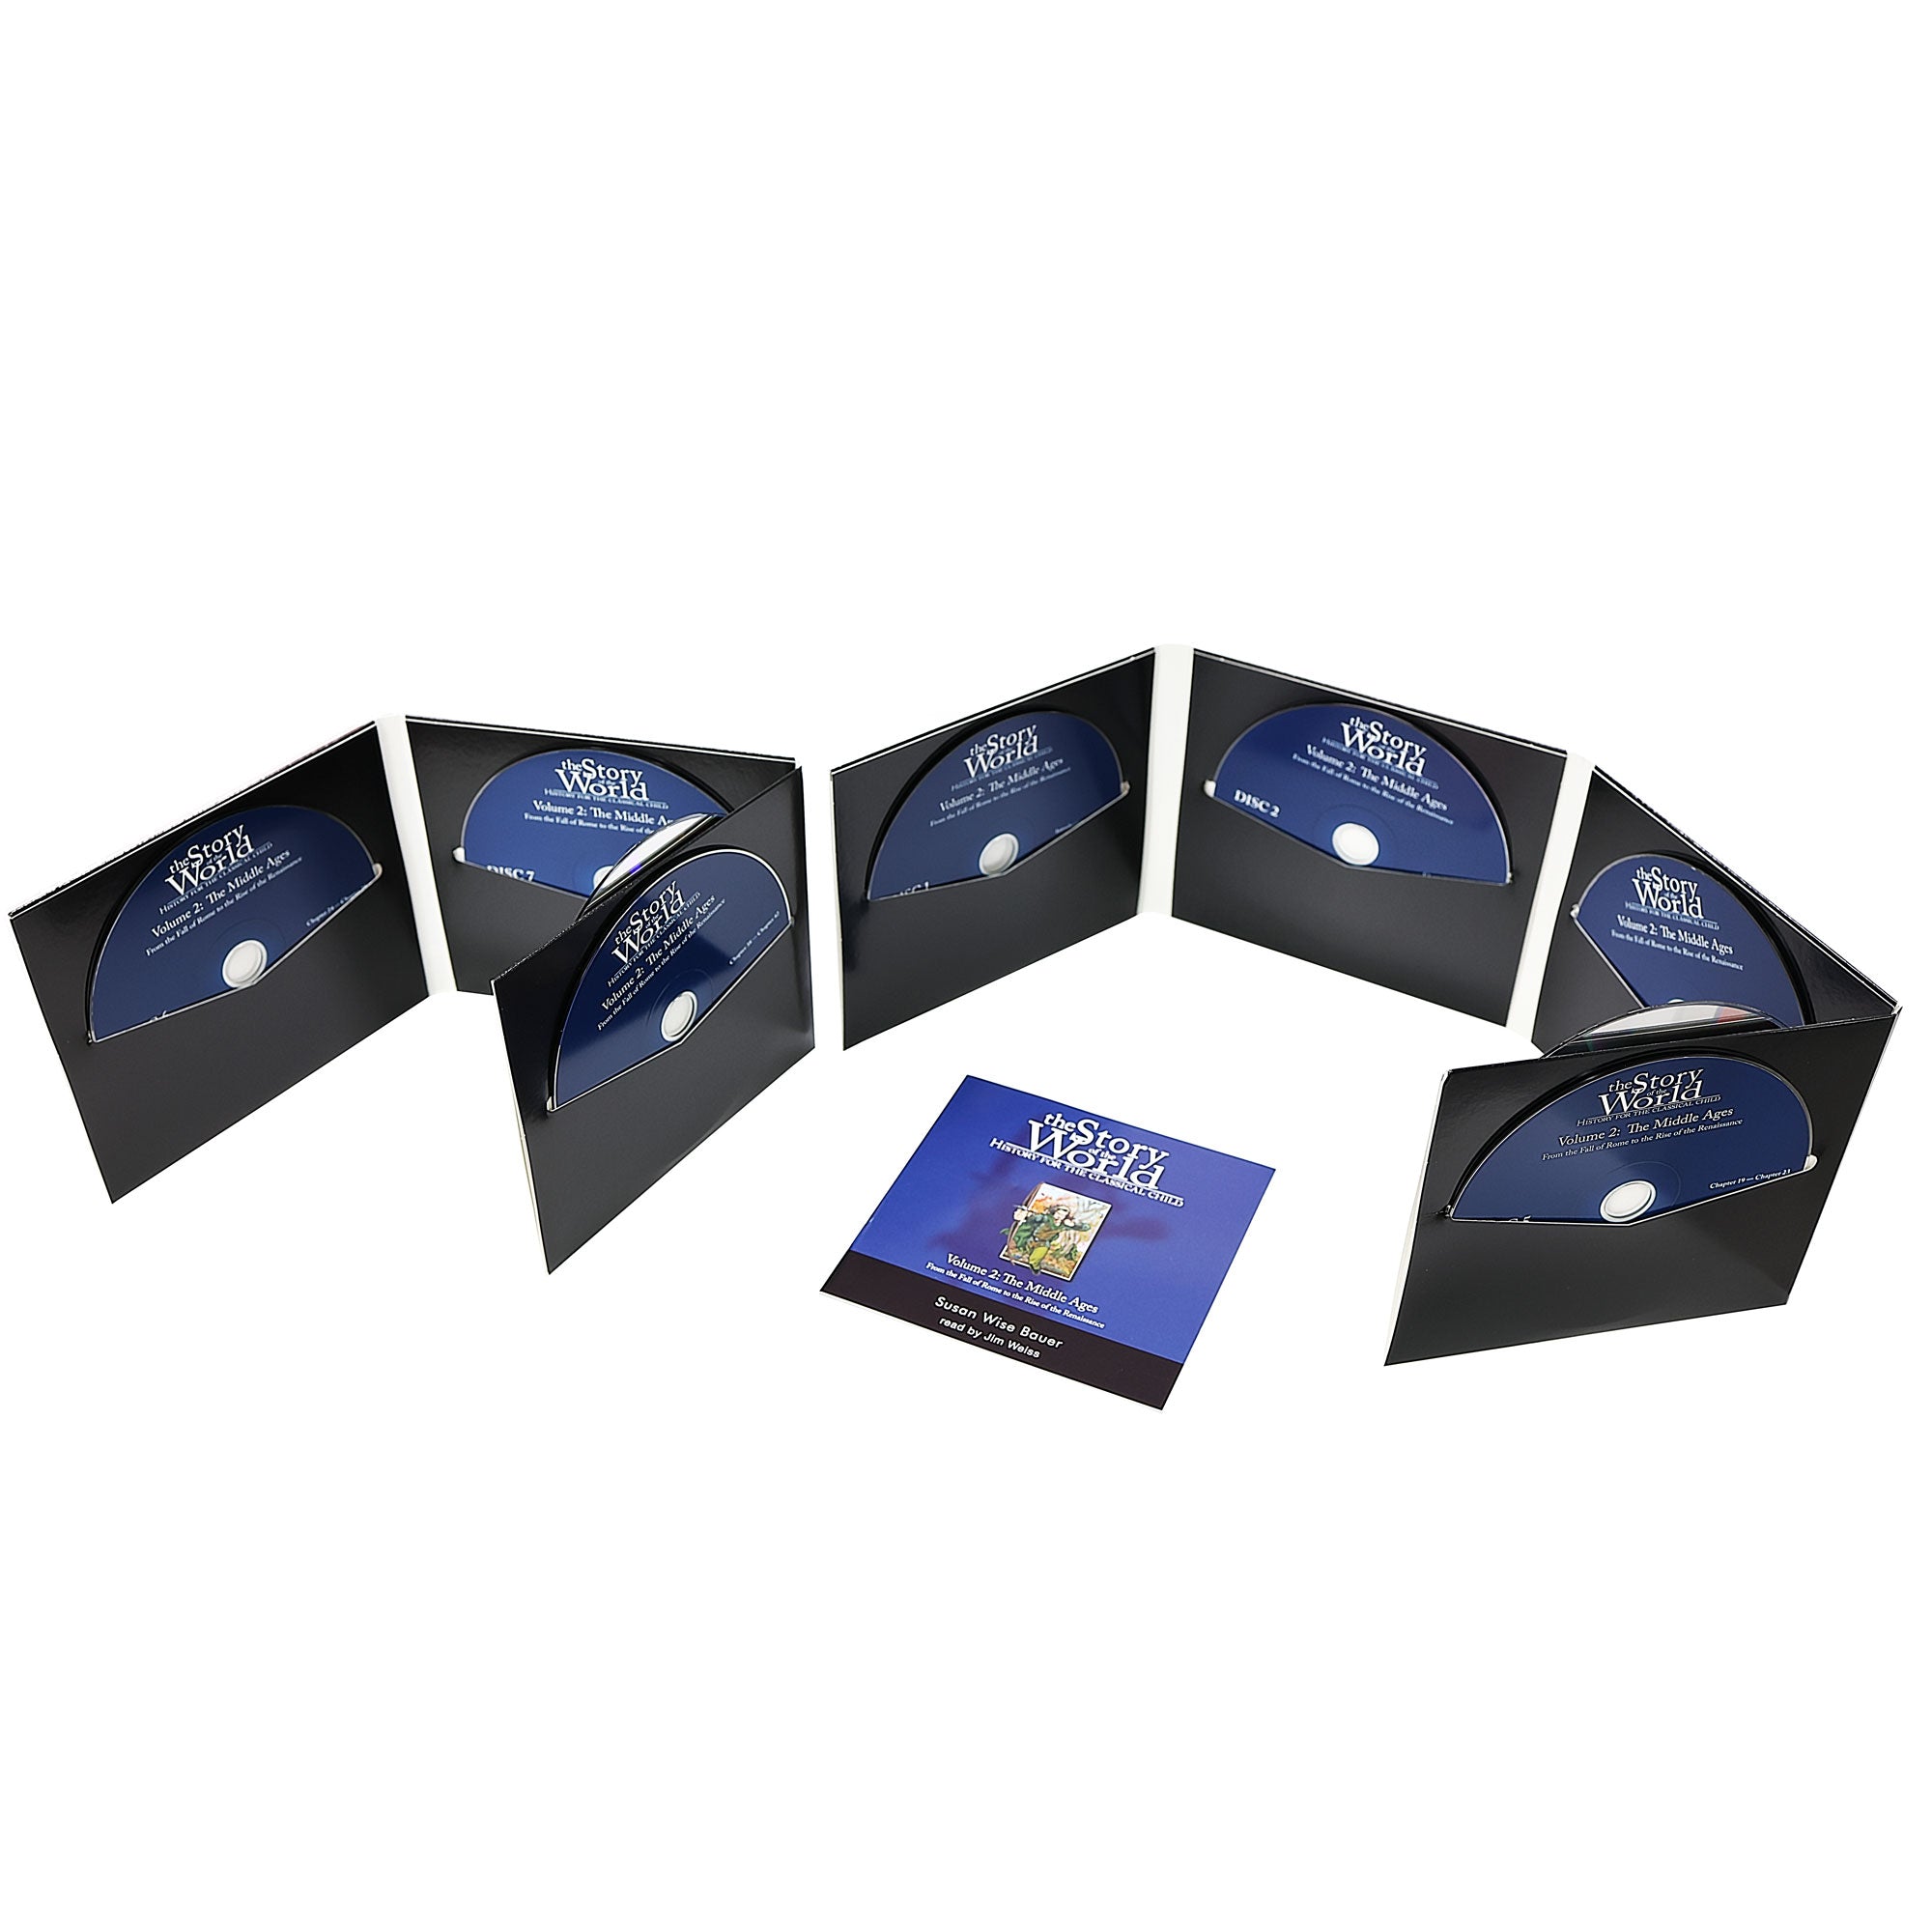 The Story of the World 2 audio book contents spread out over a white surface. 2, long, black cardstock panels standing up and spread out. one containing 4 visible CD’s and the other containing 5 visible CD’s. Laying in front is the manual booklet. The cover is mainly blue with a black bottom, white text, and a small illustration in the middle. The illustration is of Robin Hood in a forest pulling back on a bow, in the process of shooting an arrow. He is wearing a green outfit and cape. 